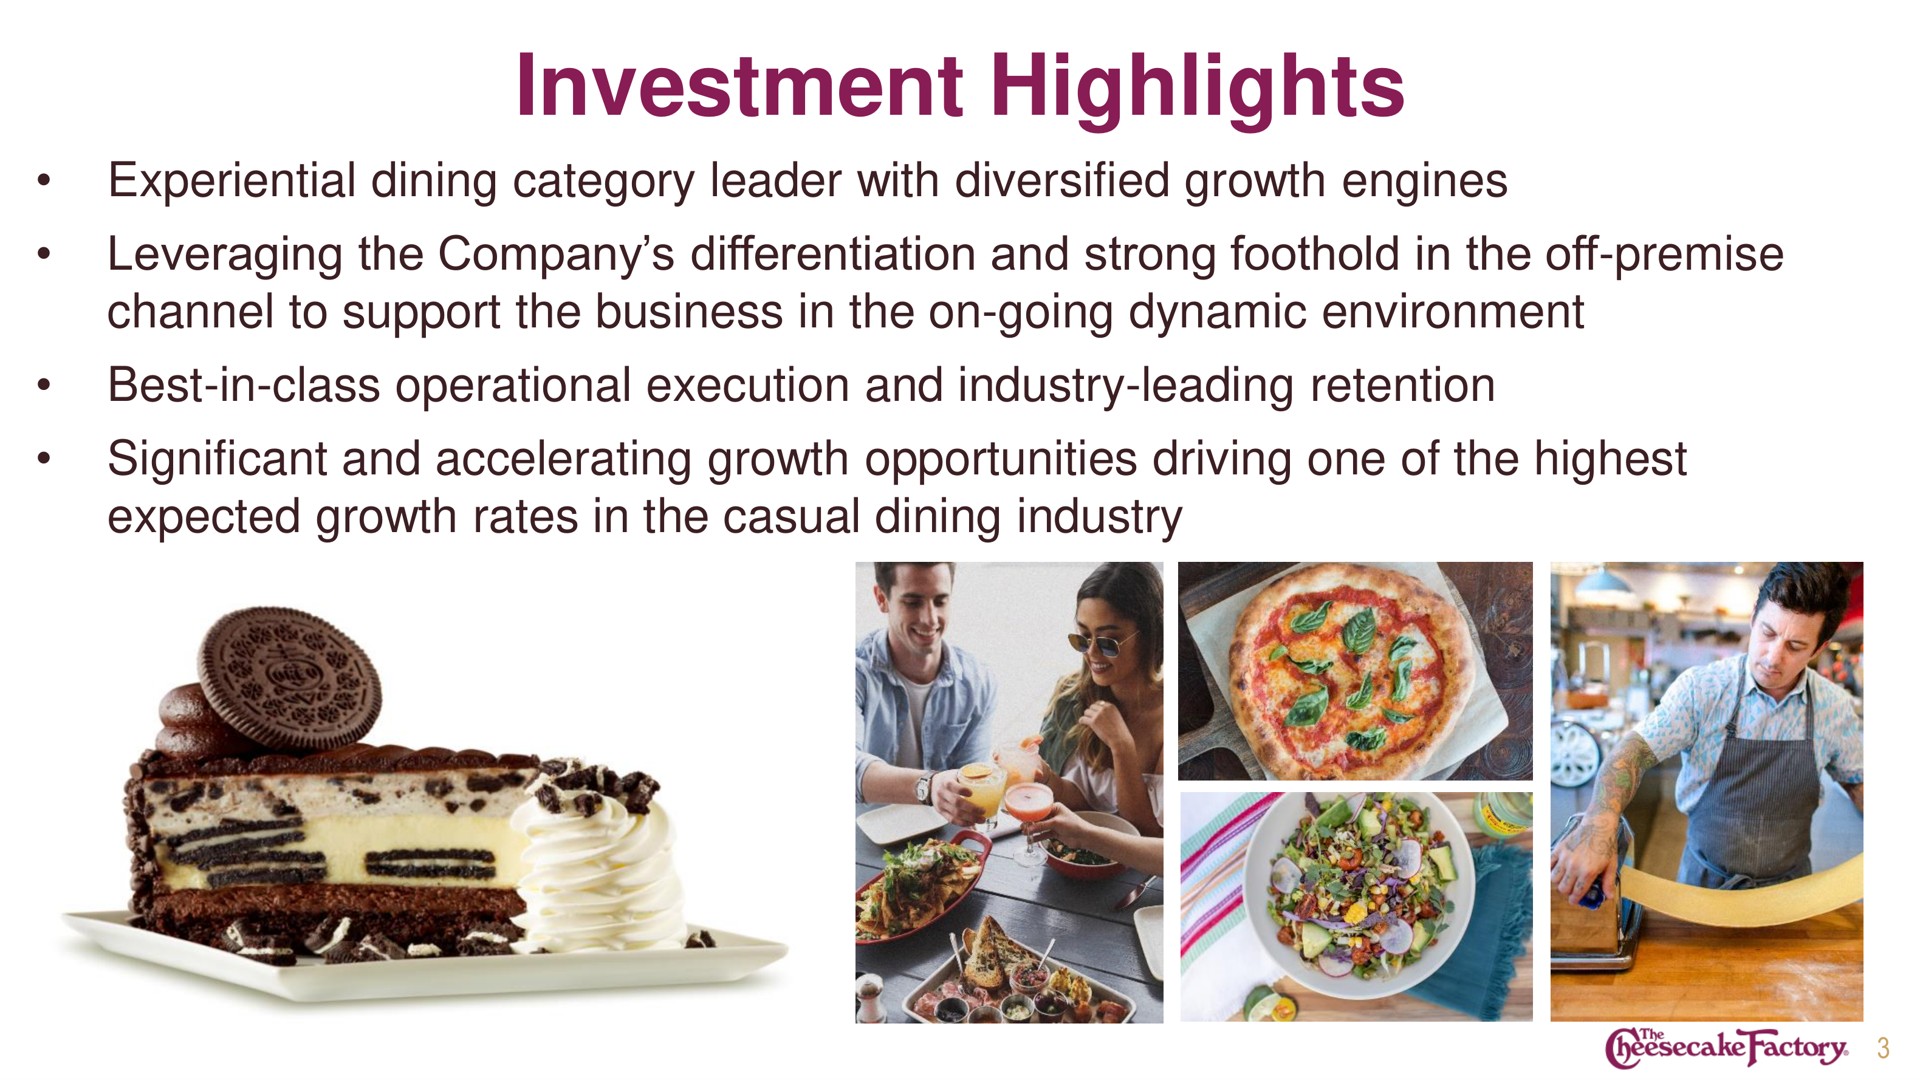 investment highlights | Cheesecake Factory